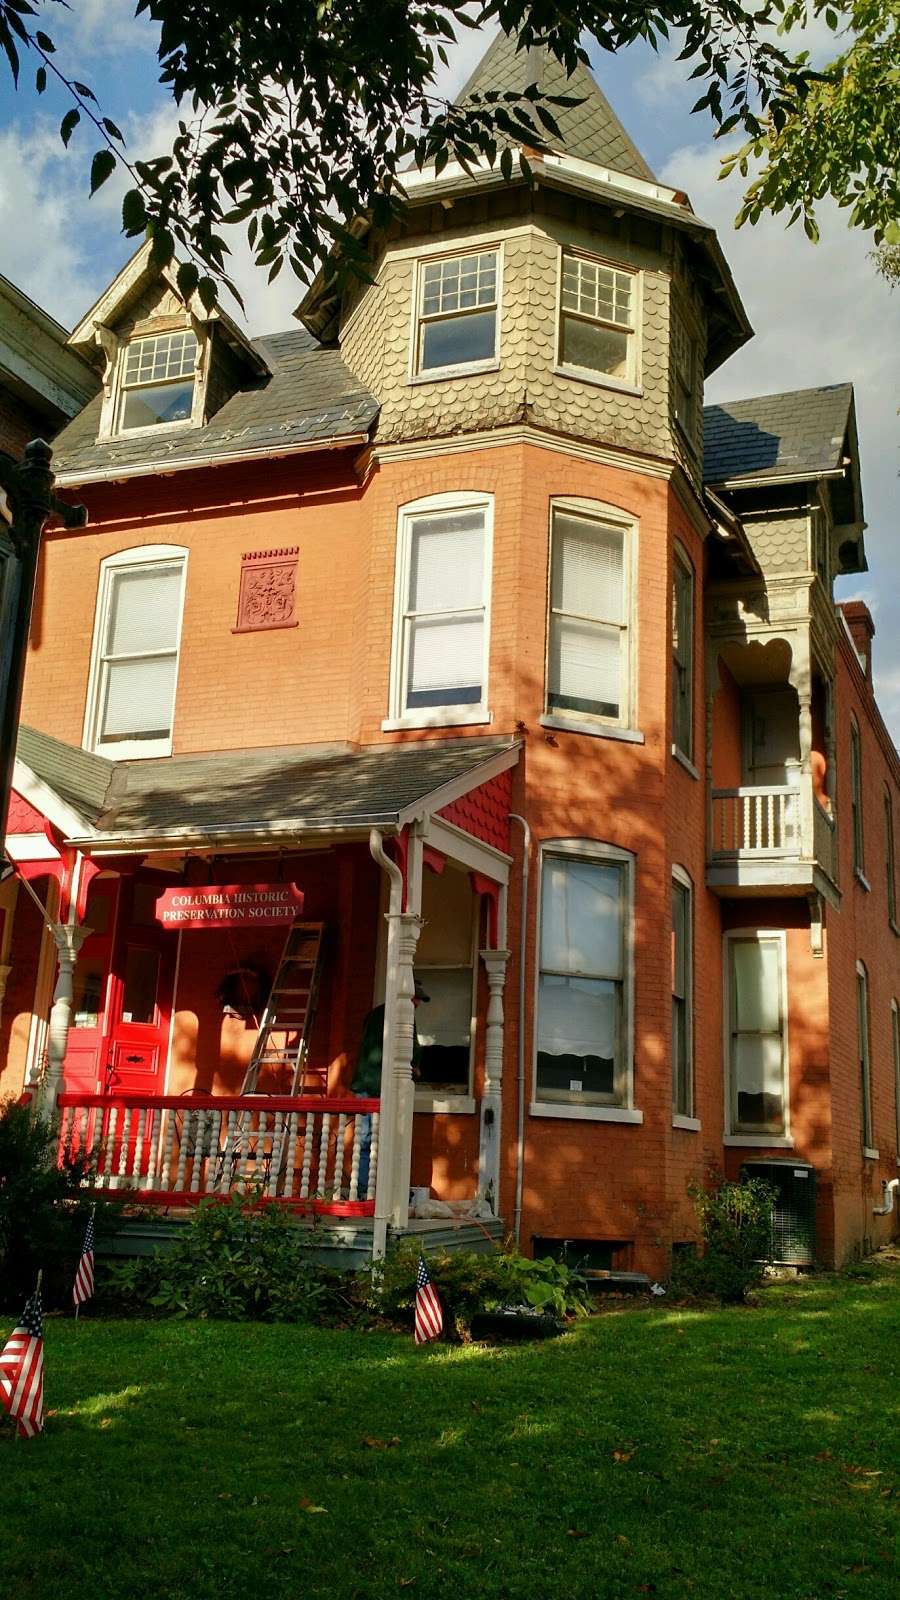 Columbia Historic Preservation Society | 21 N 2nd St, Columbia, PA 17512 | Phone: (717) 684-2894